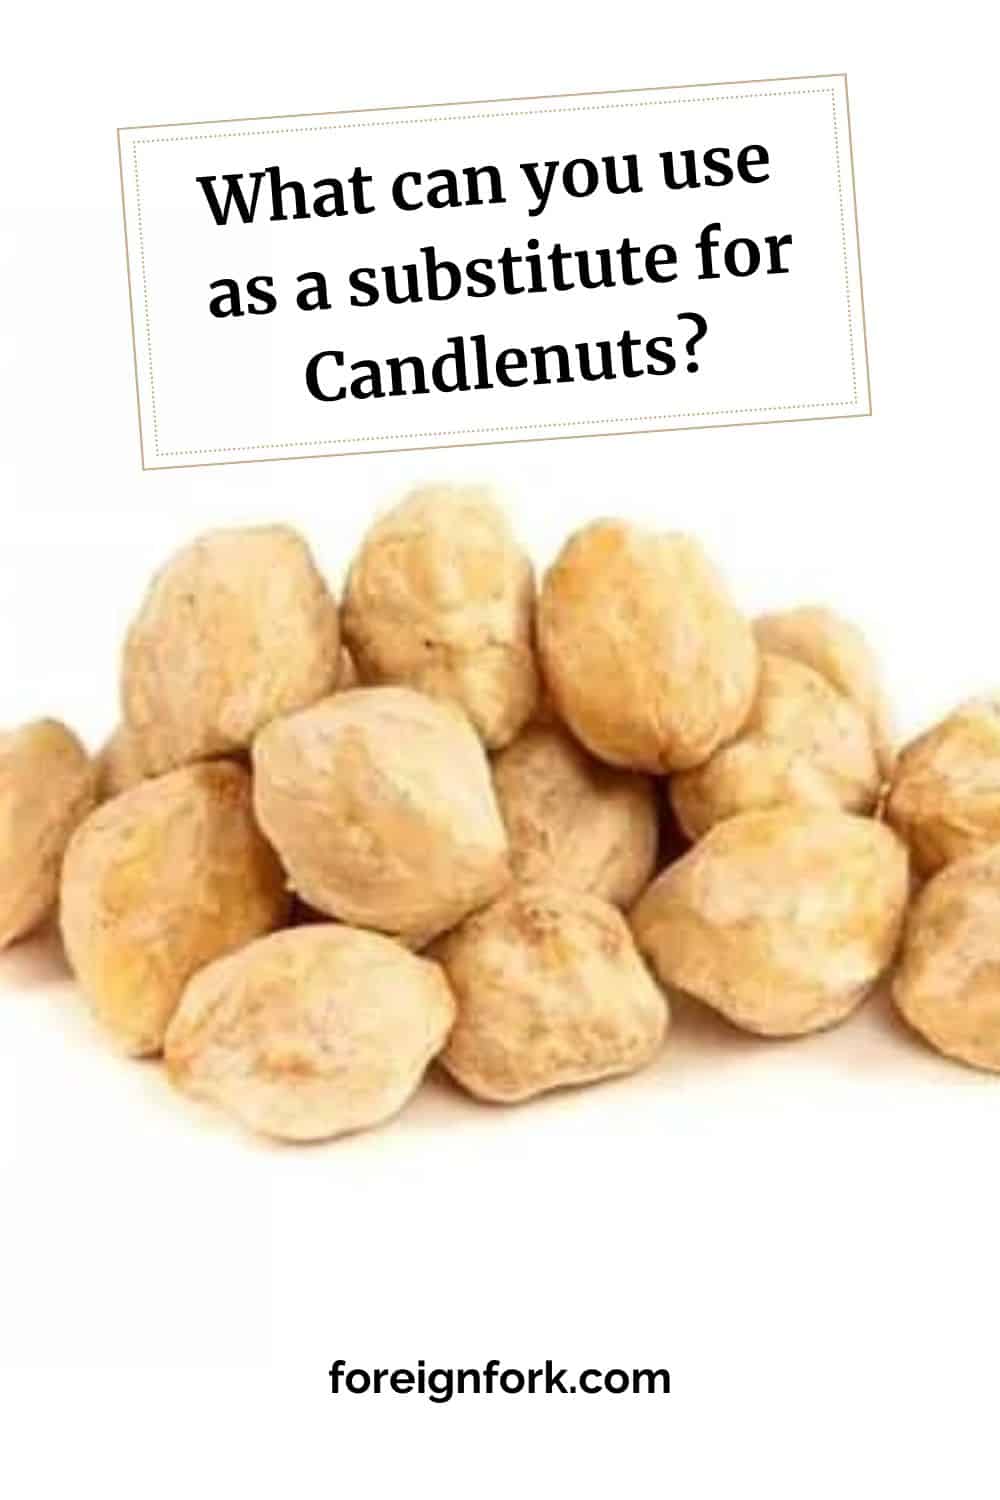 A pinterest image showing candlenuts and text that says "what can you use as a substitute for candlenuts".